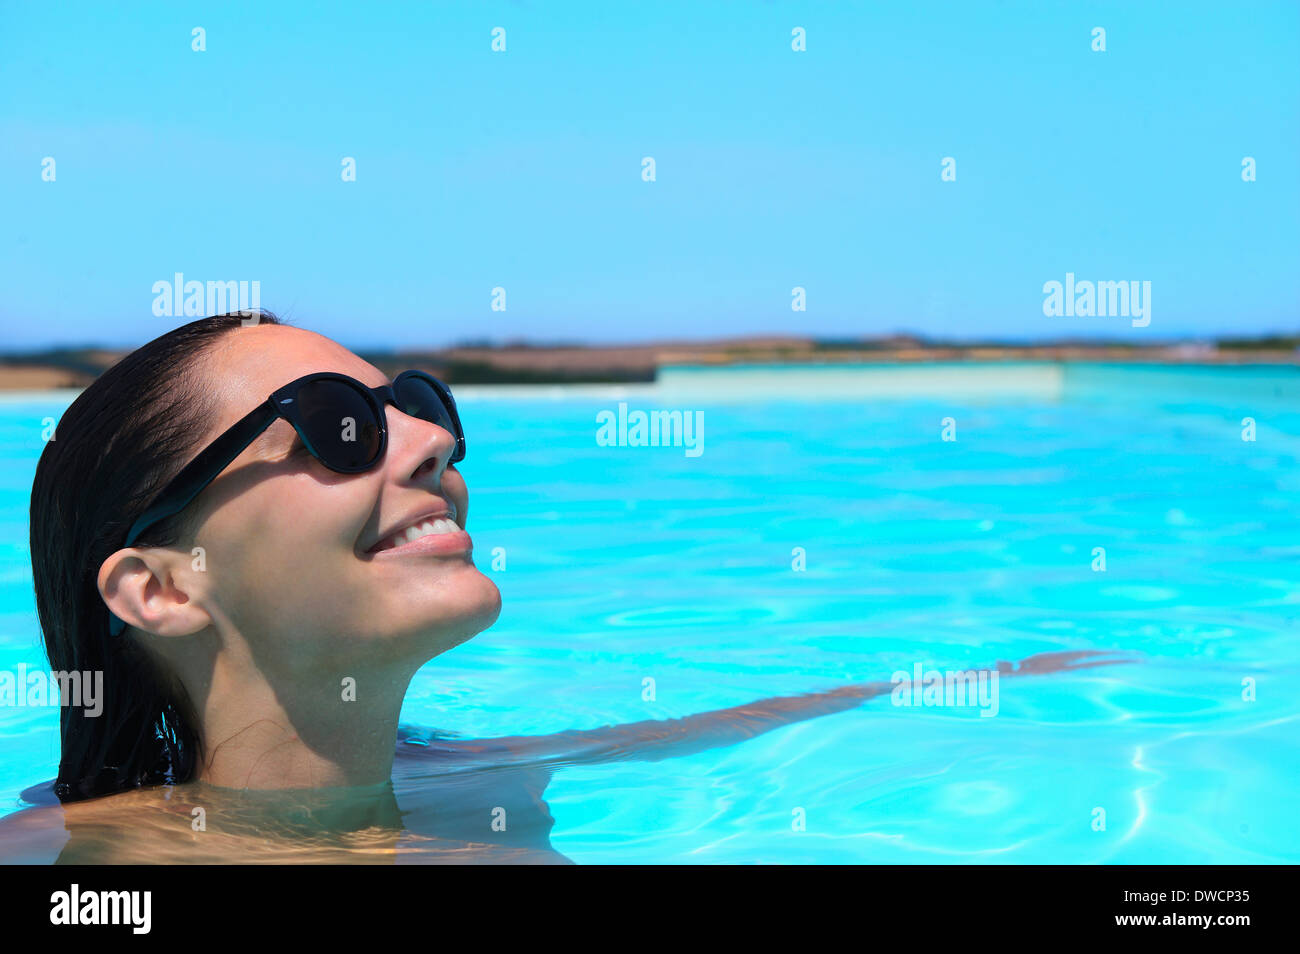 Mid adult woman wearing sunglasses relaxing in pool Banque D'Images